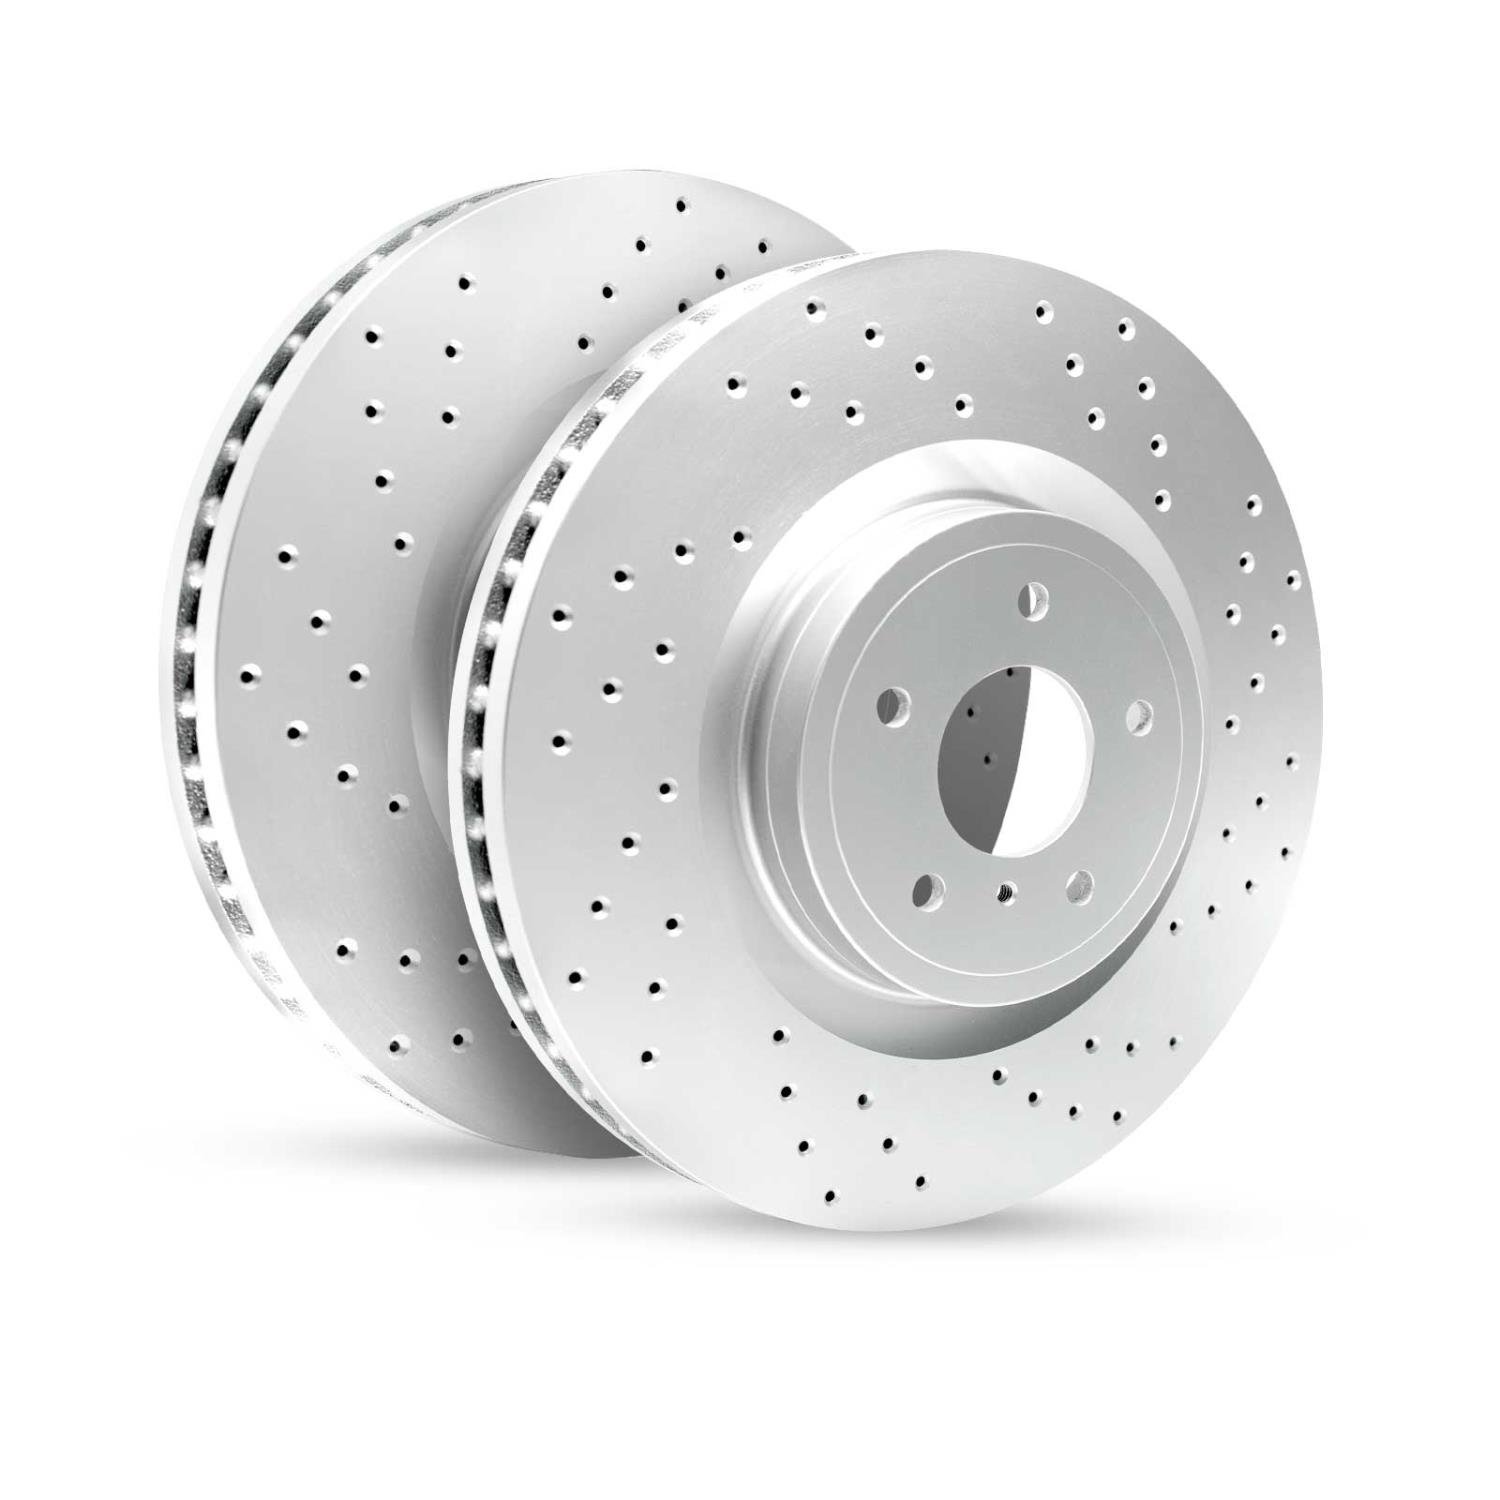 GEO-Carbon Drilled/Slotted Rotors, 2001-2008 Fits Multiple Makes/Models, Position: Front